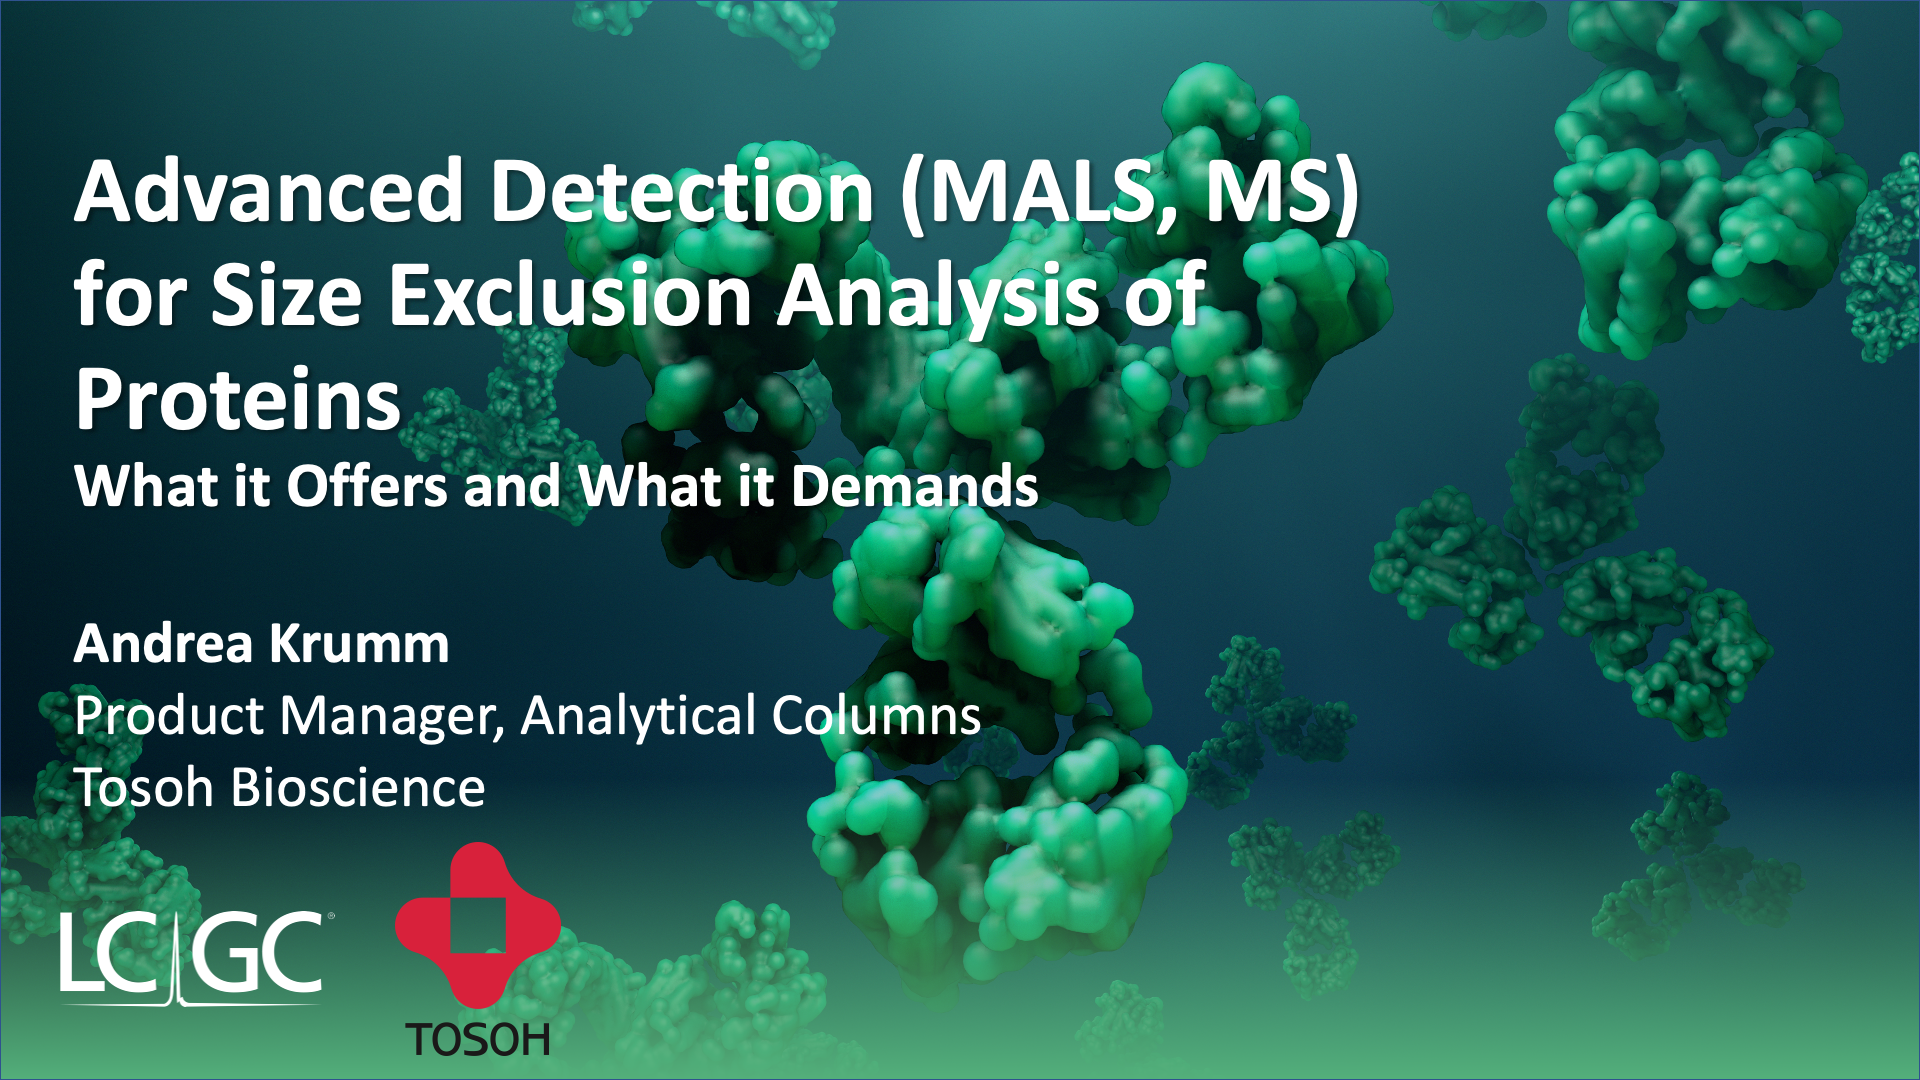 Advanced detection (MALS, MS) for size exclusion analysis of proteins - what it offers and what it demands